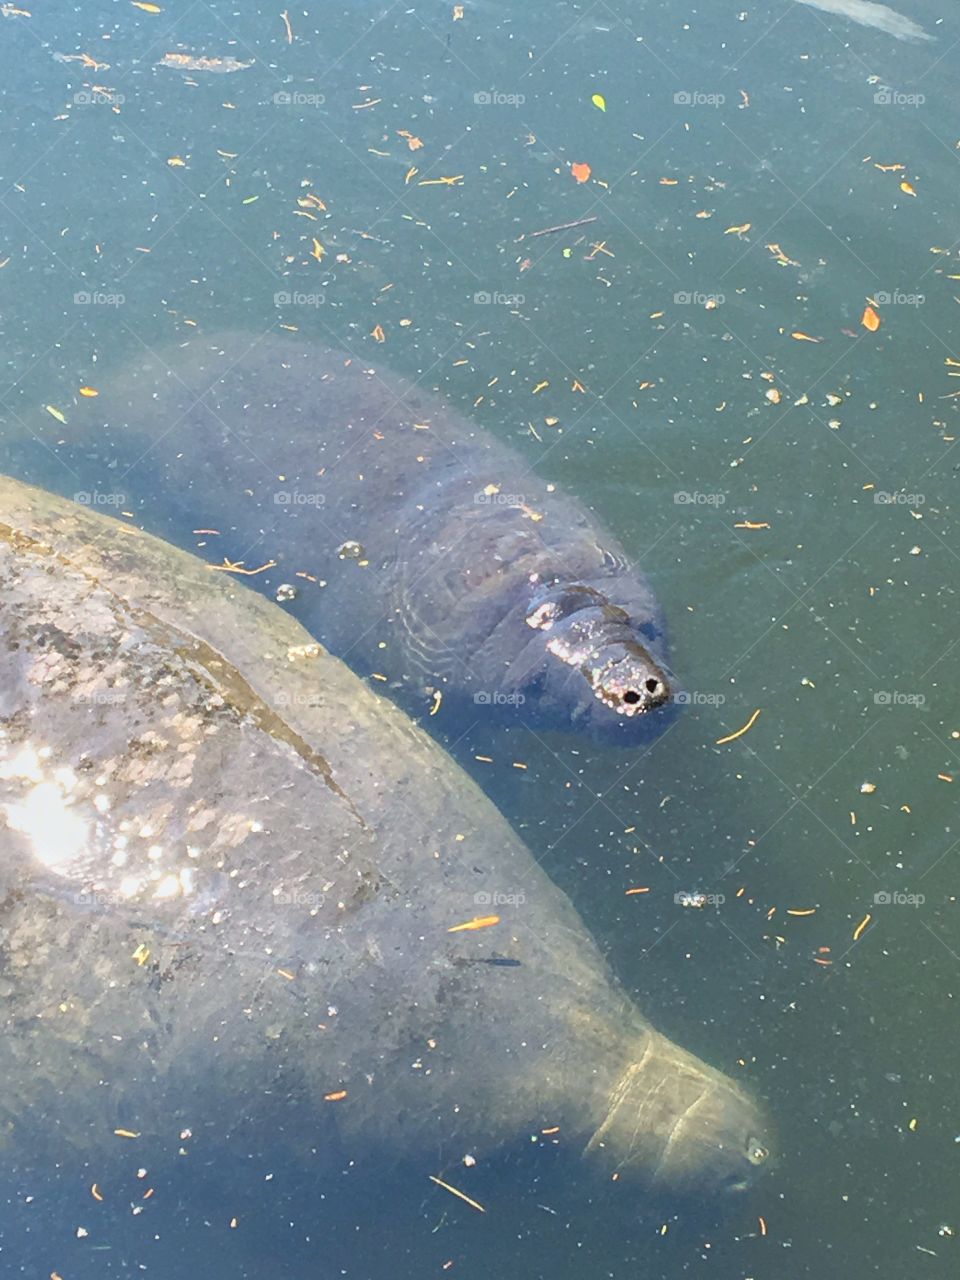 A manatee calf with mama very close by.